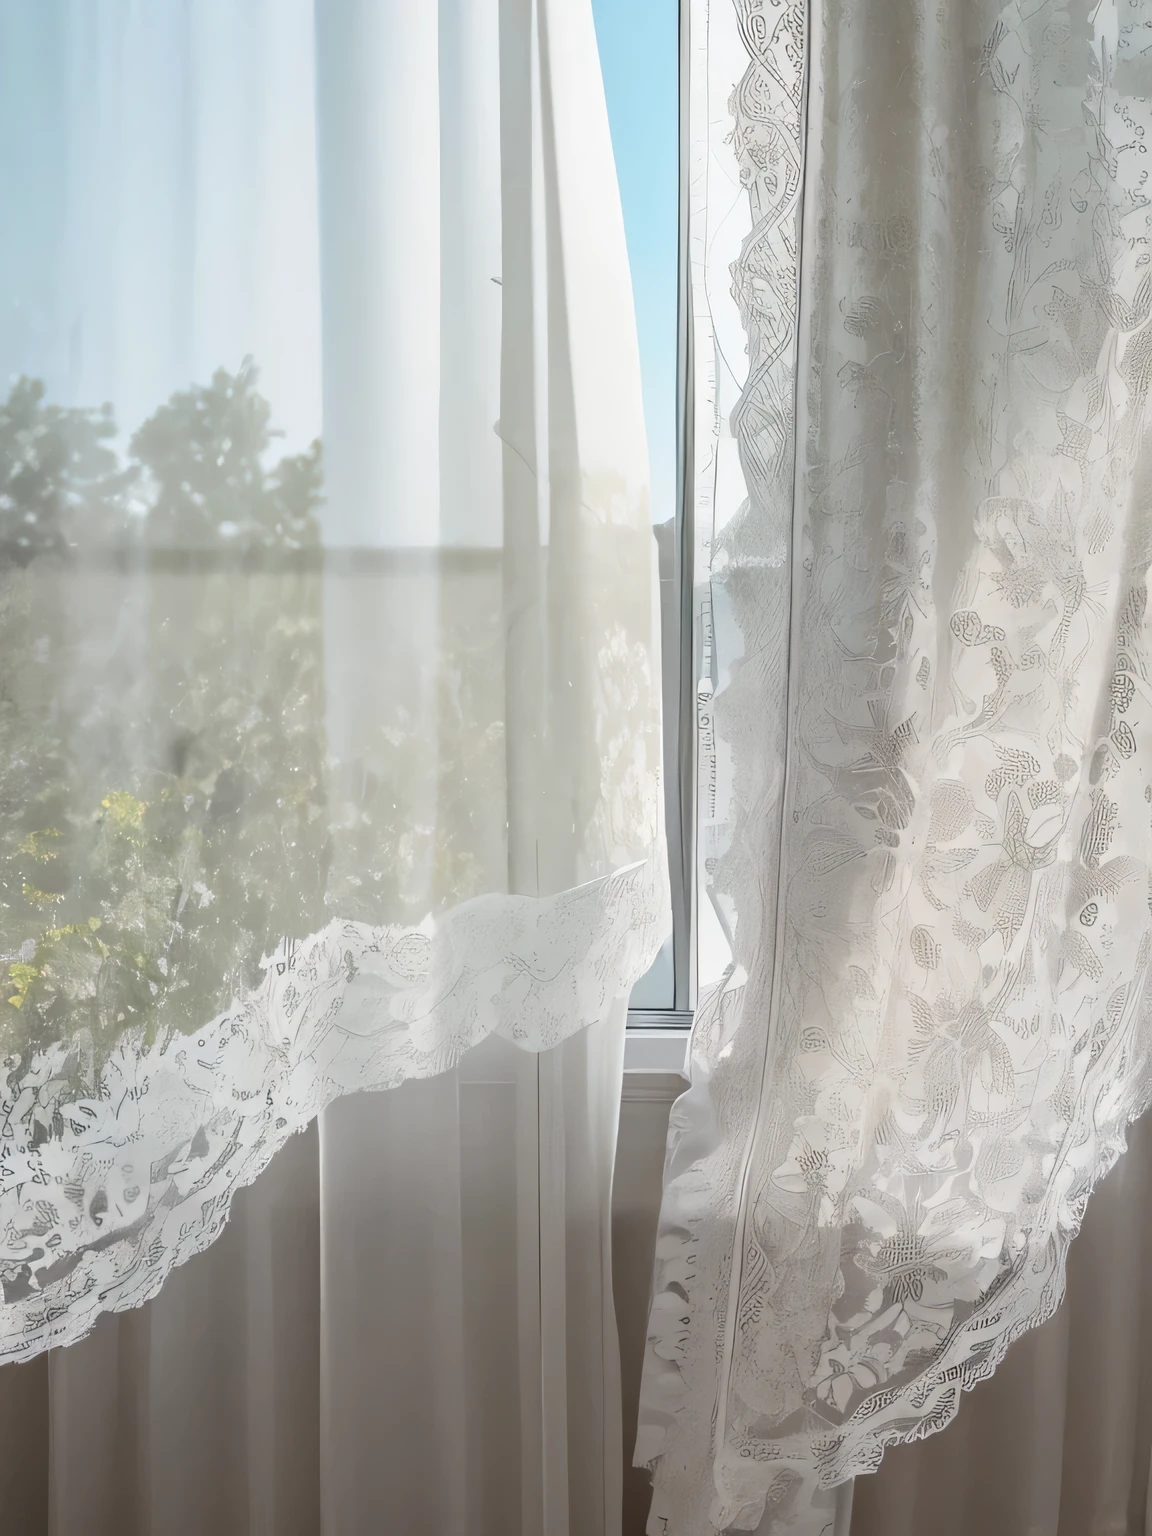 White lace curtains swaying in the wind